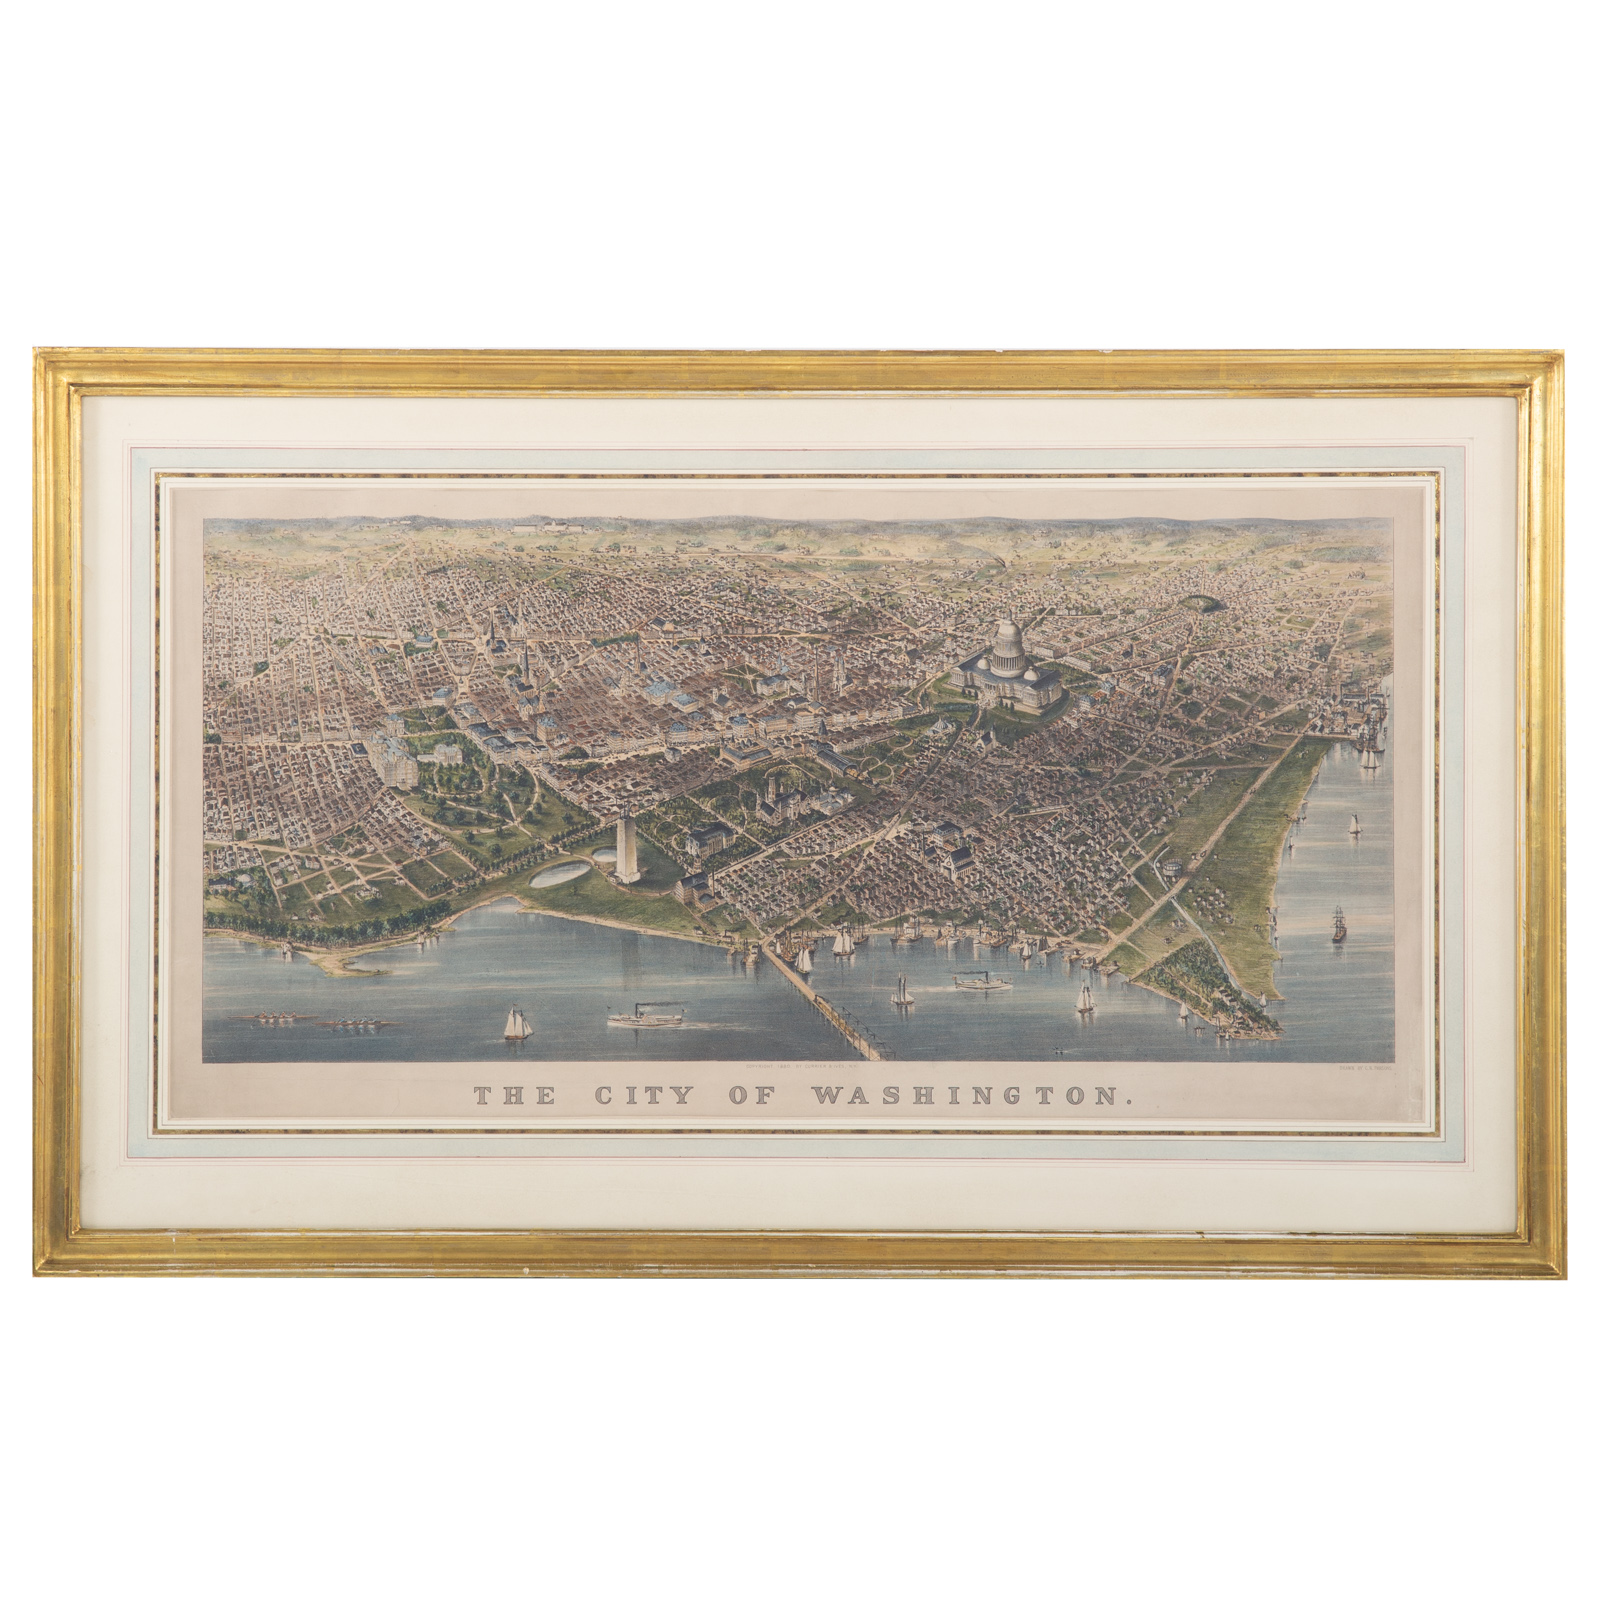 CURRIER & IVES. "THE CITY OF WASHINGTON,"